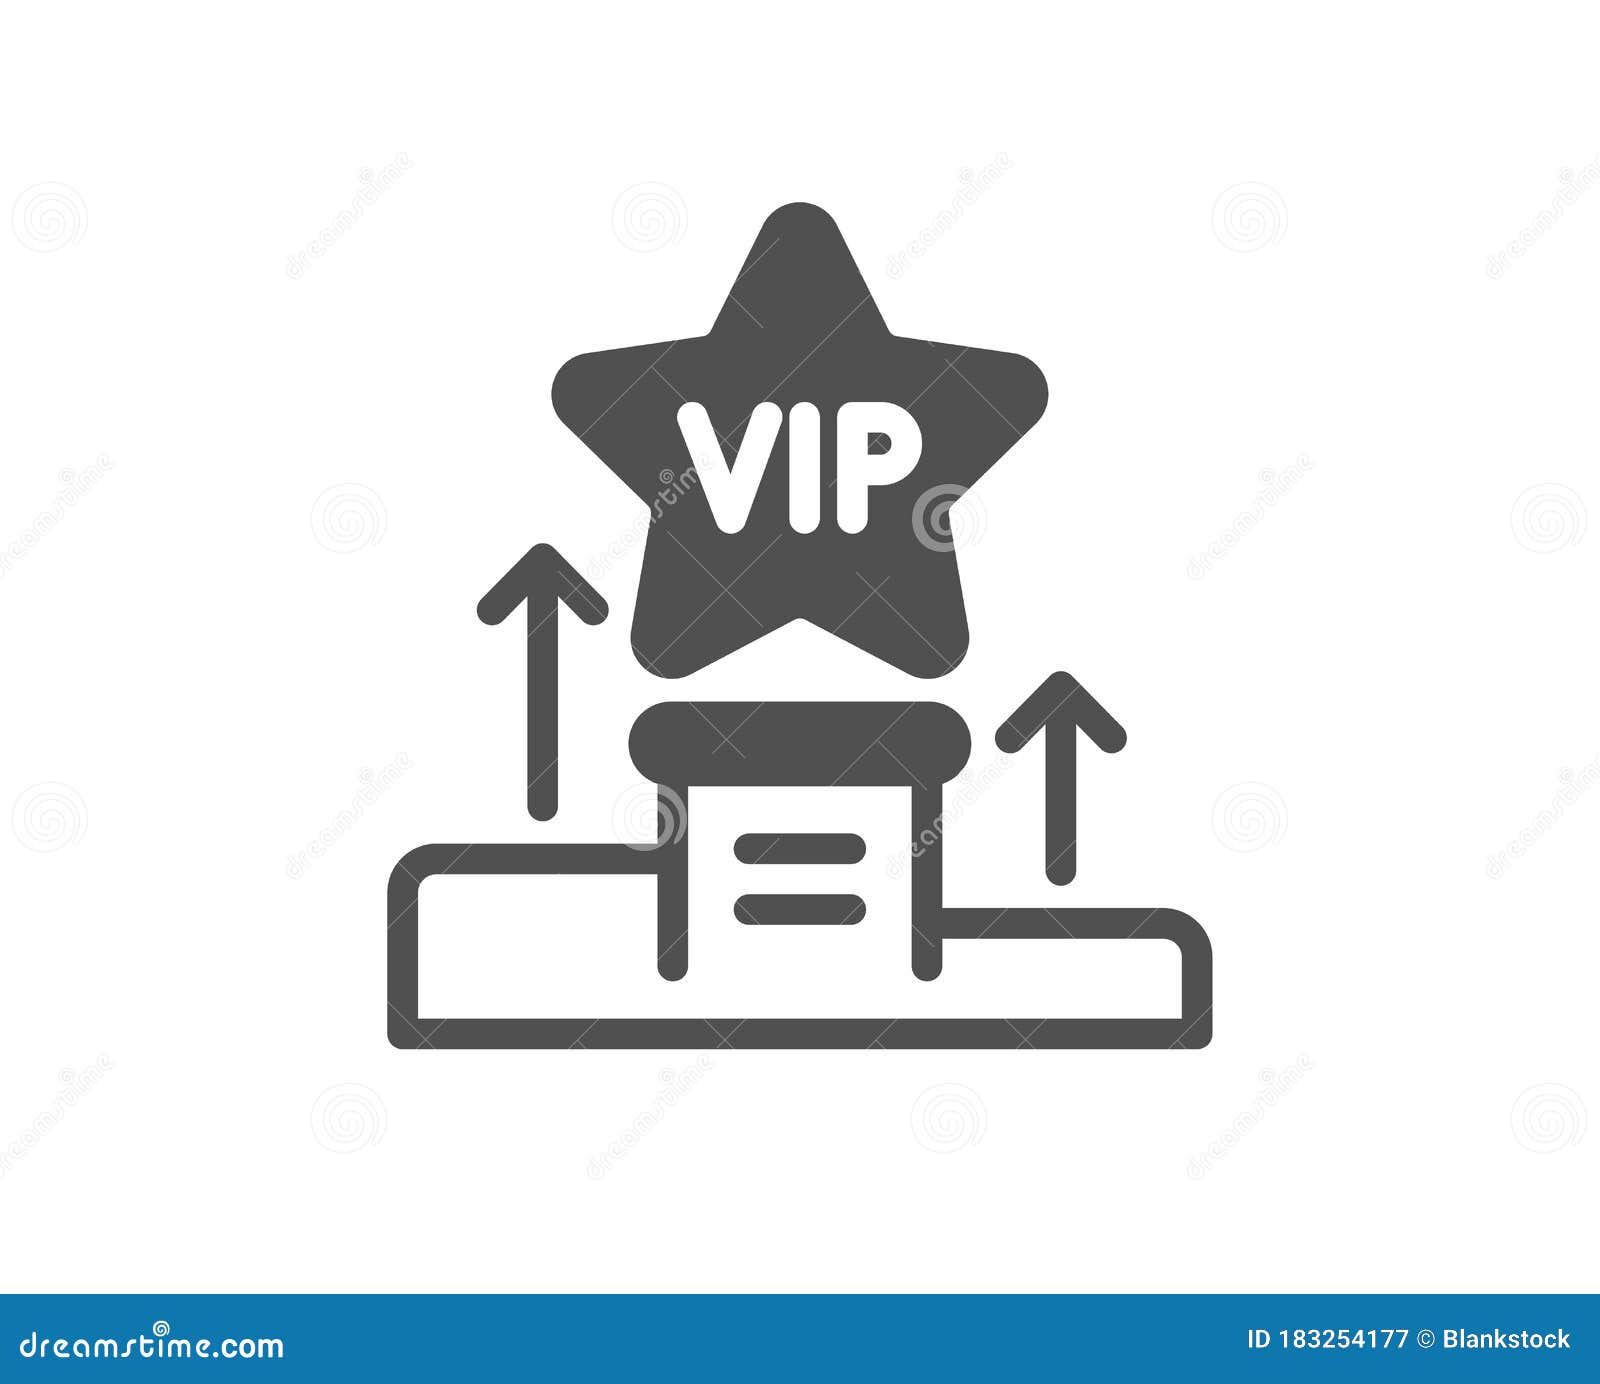 Vip Podium Icon Very Important Person Star Sign Vector Stock Vector Illustration Of Symbol Place